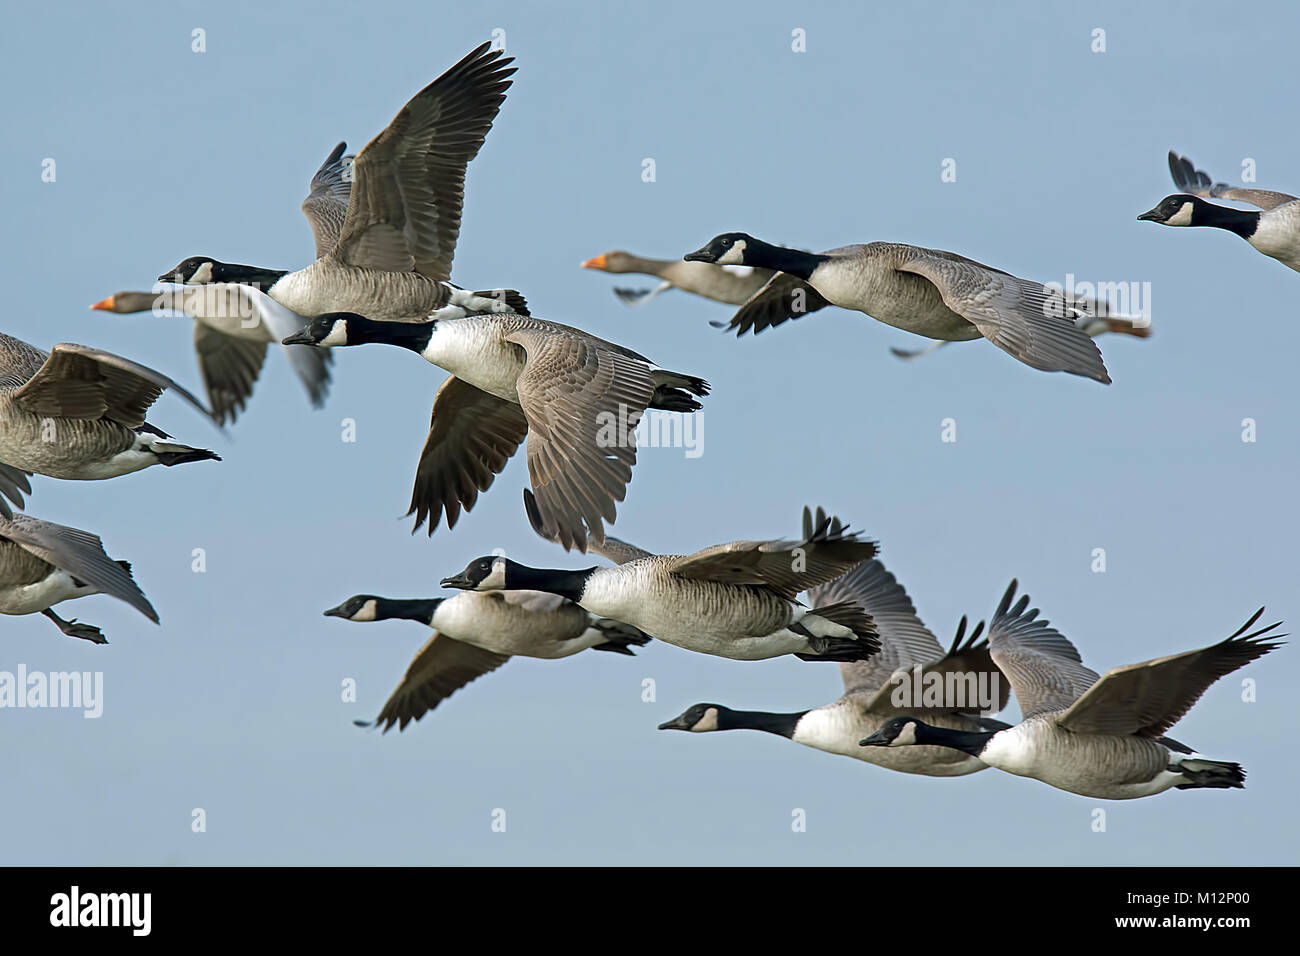 A gaggle of Canada Geese in flight with a couple Greylag geese in the background Stock Photo